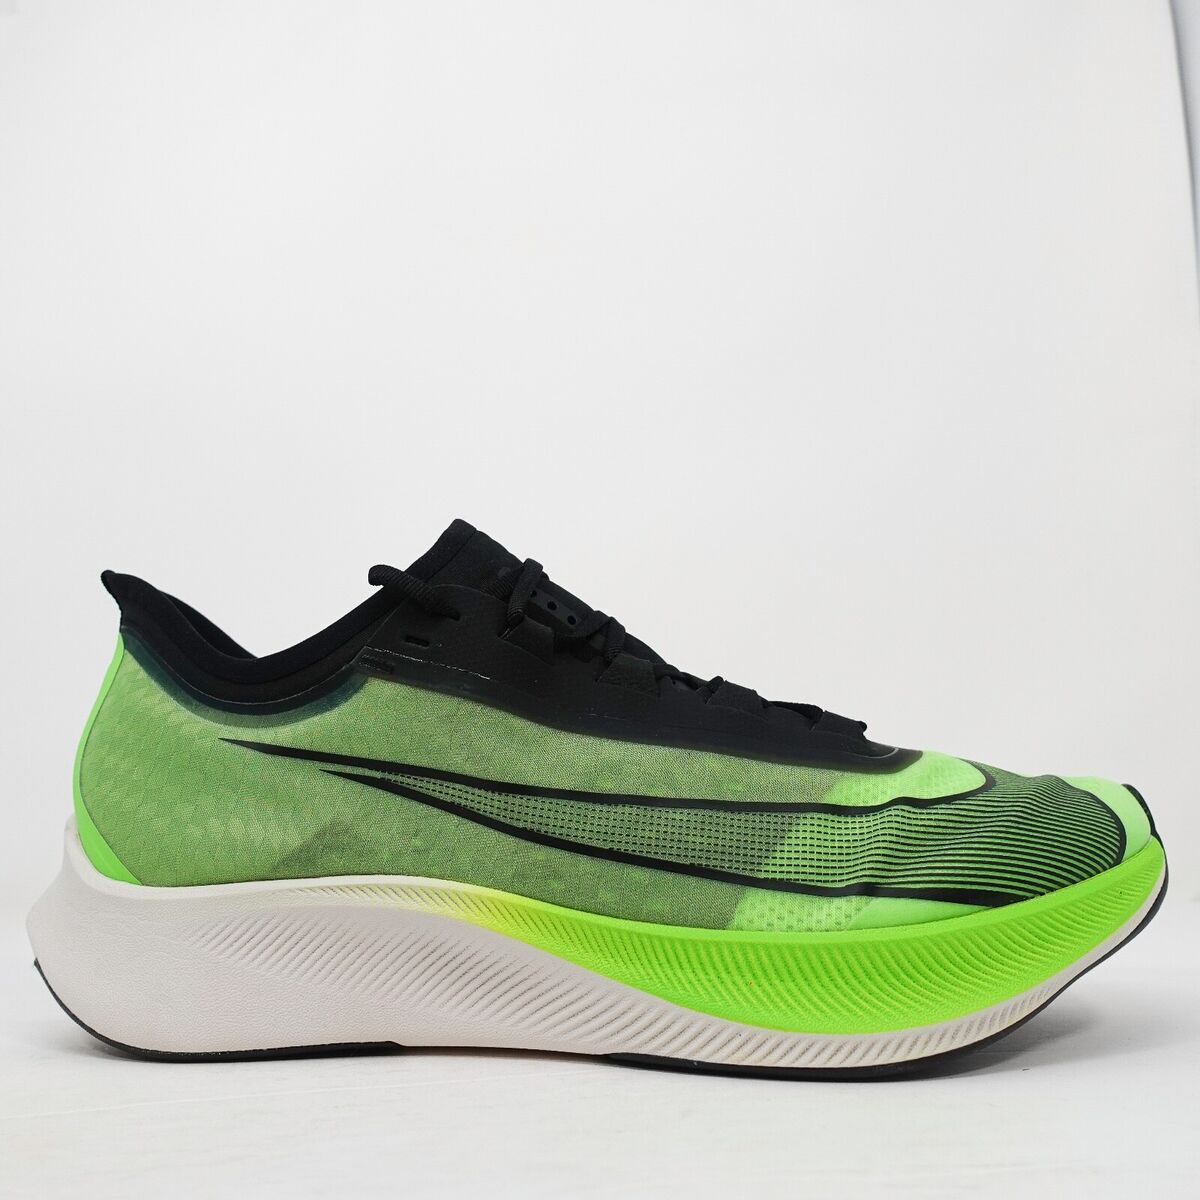 Nike Fly 3 Vapor Weave Shoes Electric Green AT8240-300 Mens Size 14 | eBay